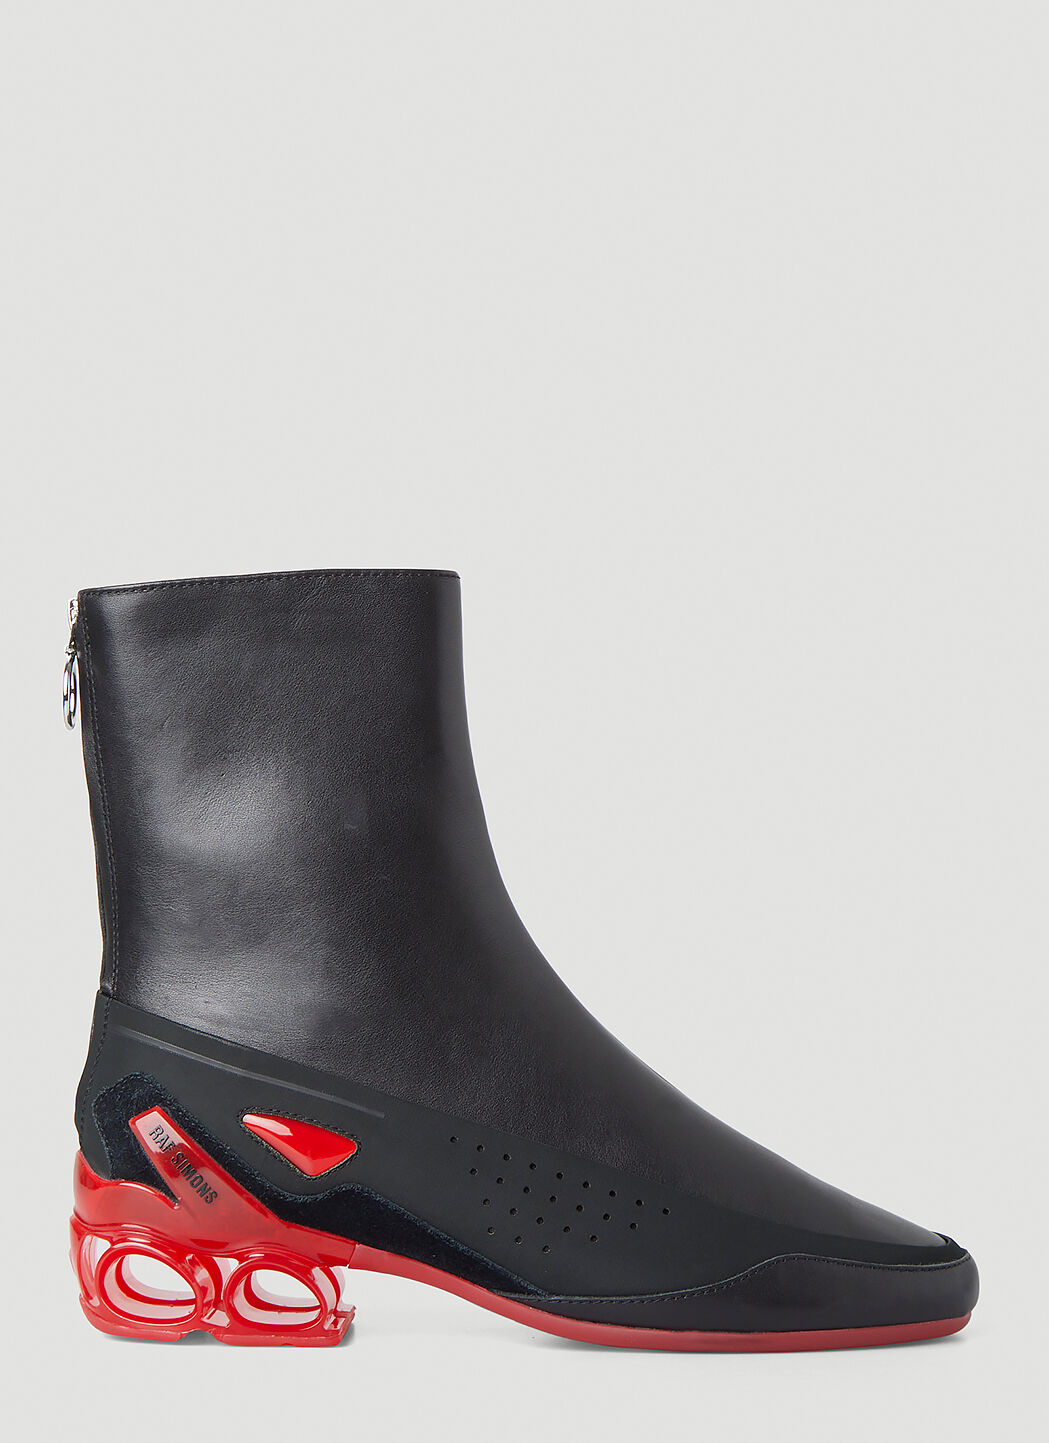 Raf Simons x Fred Perry Cycloid High Boots 黑色 rsf0152002